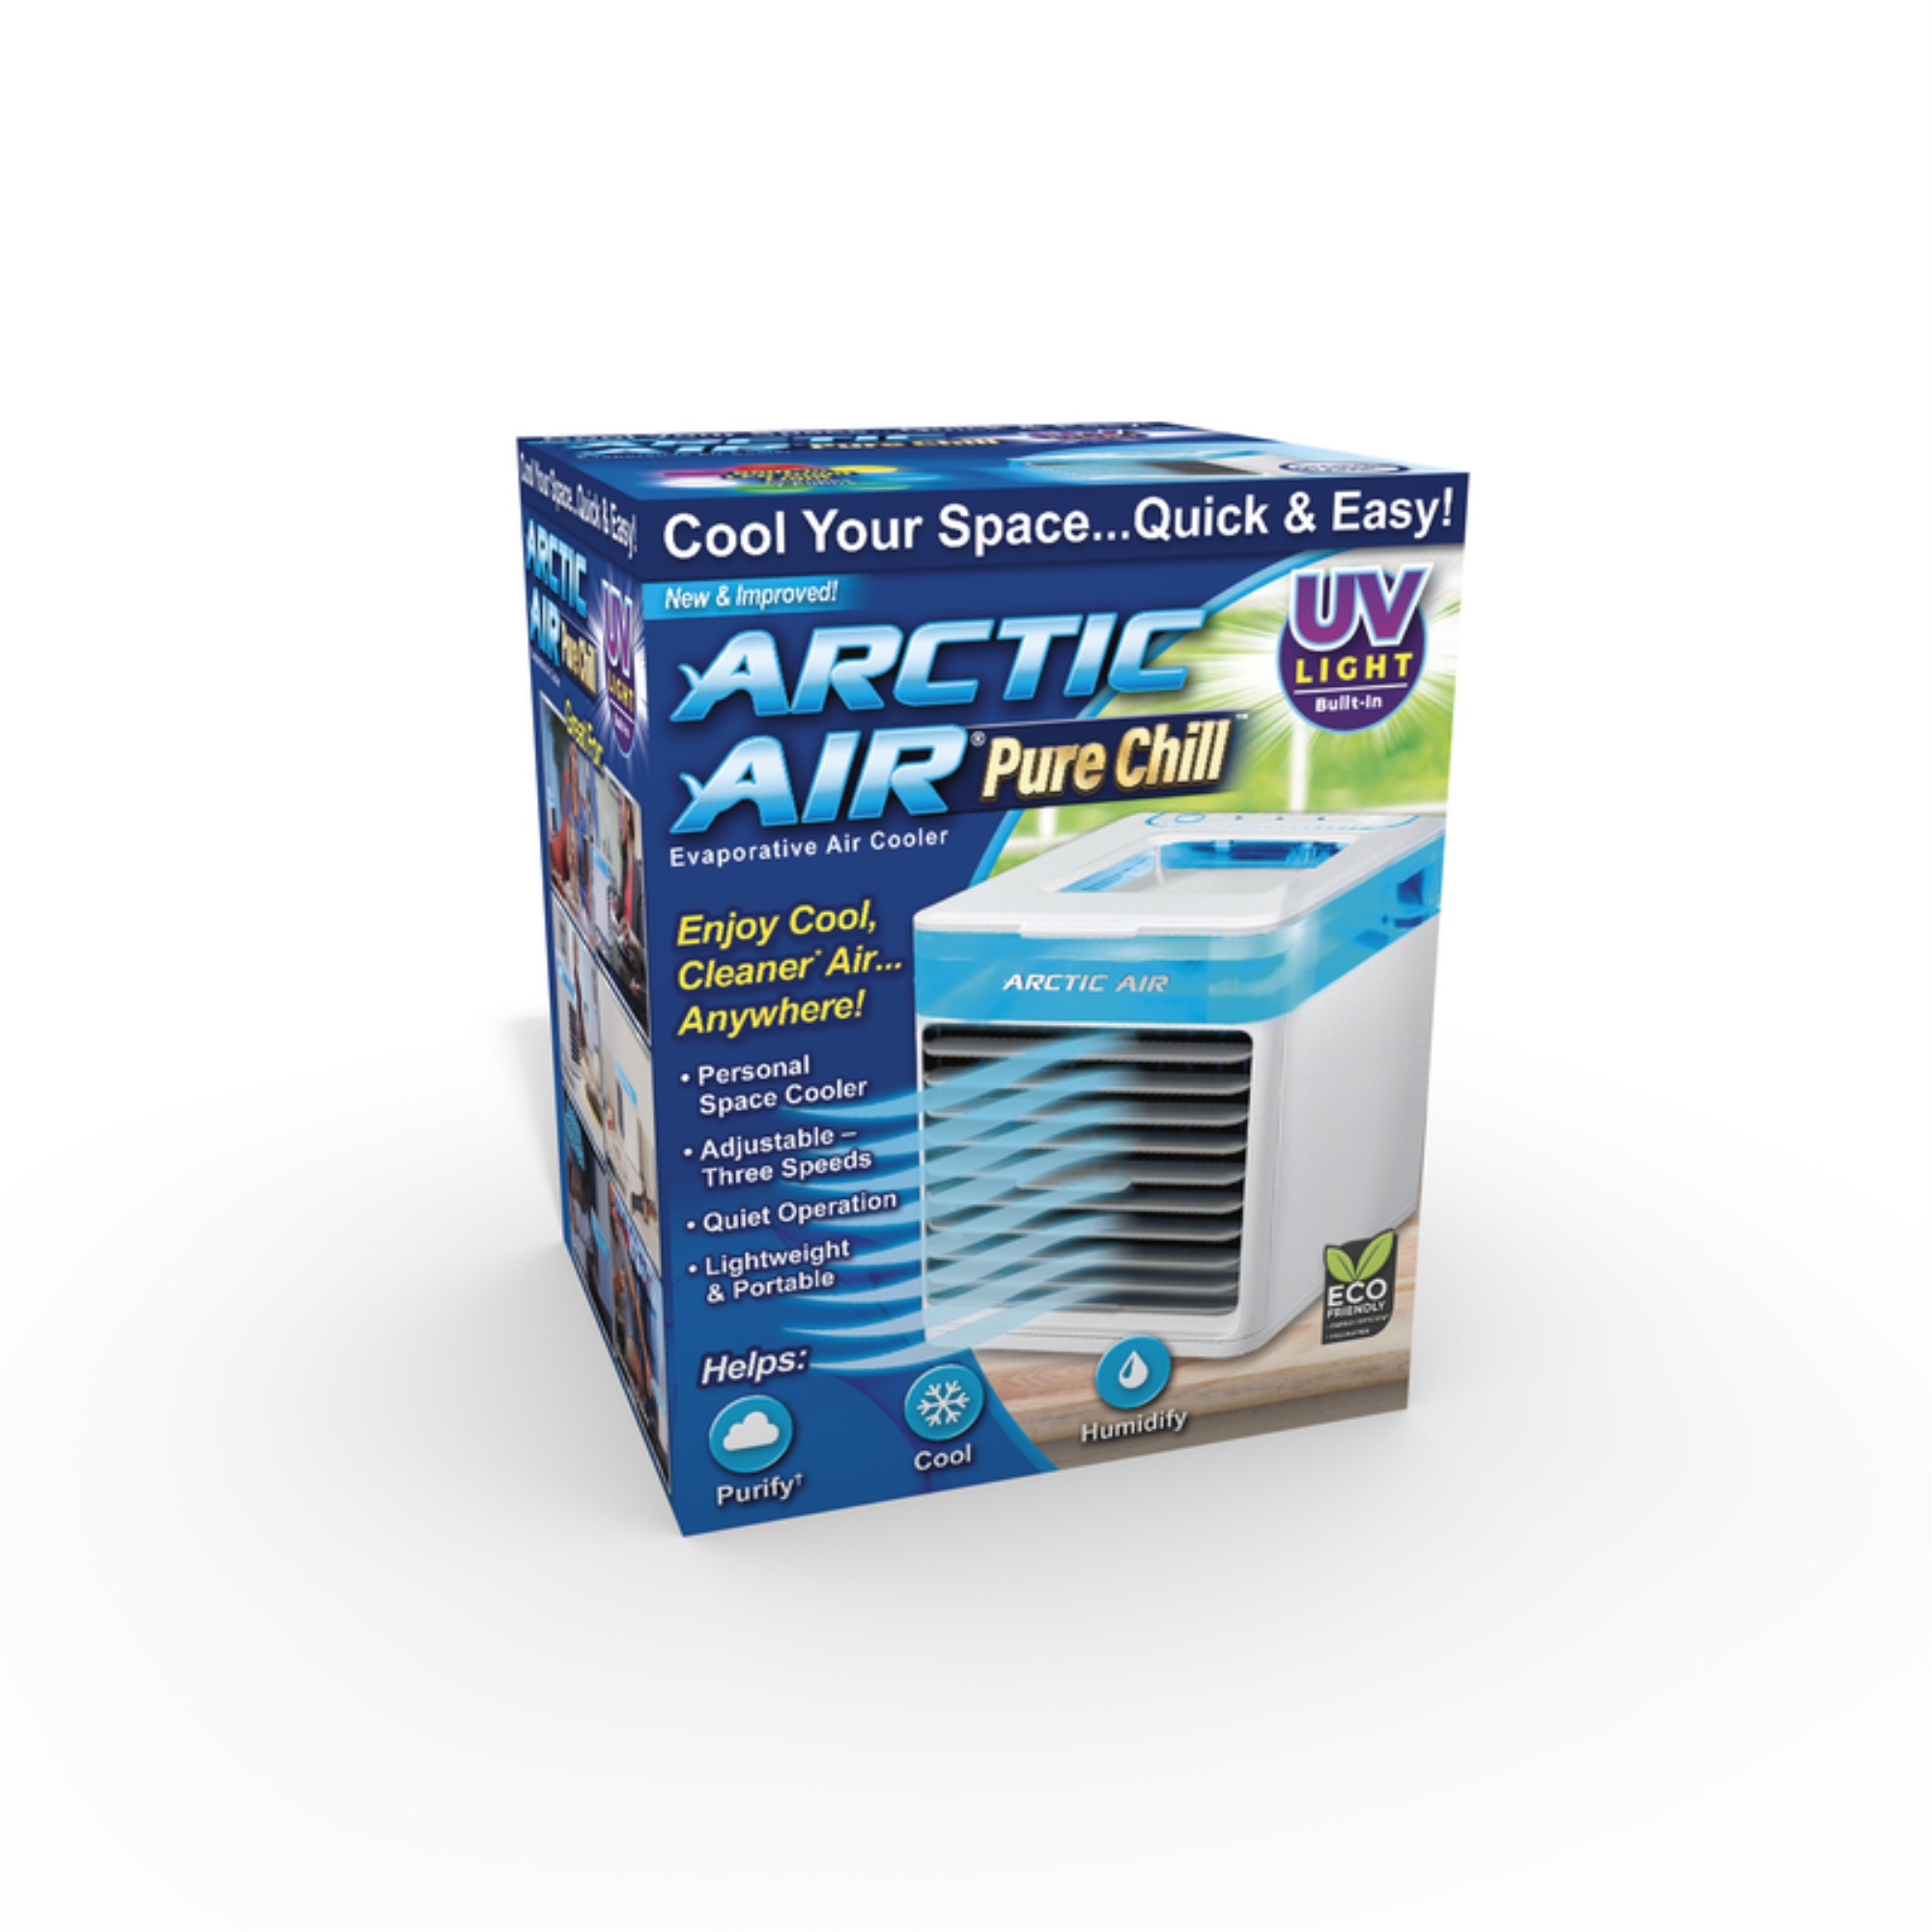 Arctic Air Pure Chill - image 1 of 4